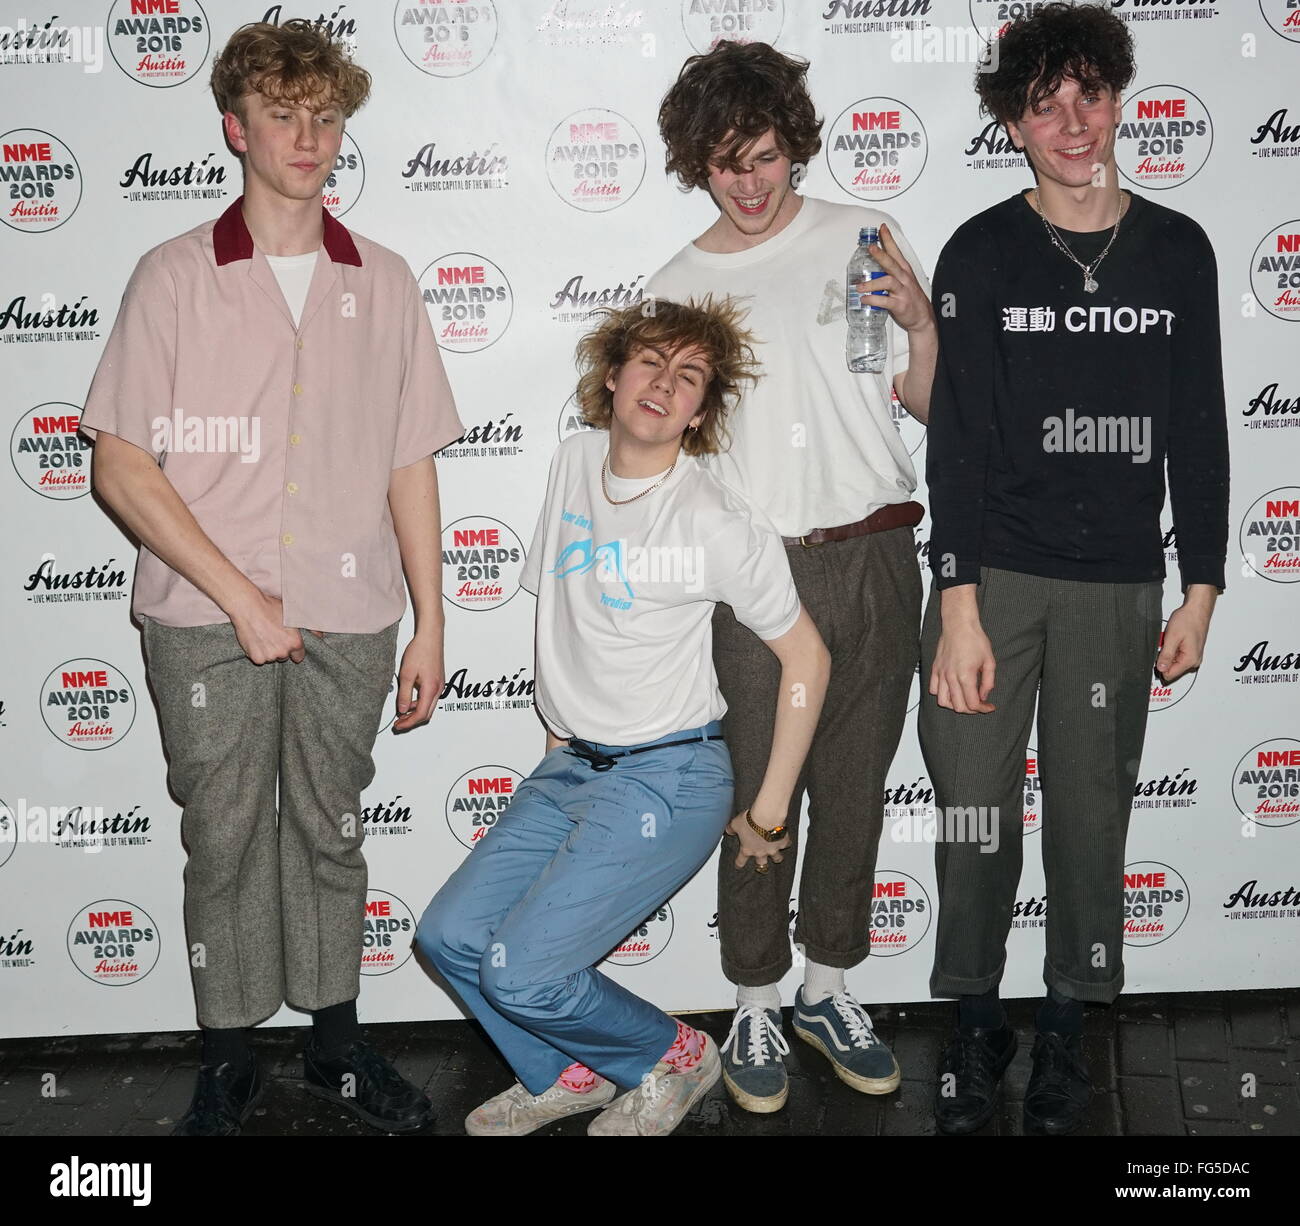 London, UK. 17th February, 2016. Rat Boy attends the NME Awards 2016 with  Austin, Texas at O2 Academy Brixton on February 17, 2016 in London,  England. Credit: See Li/Alamy Live News Stock Photo - Alamy